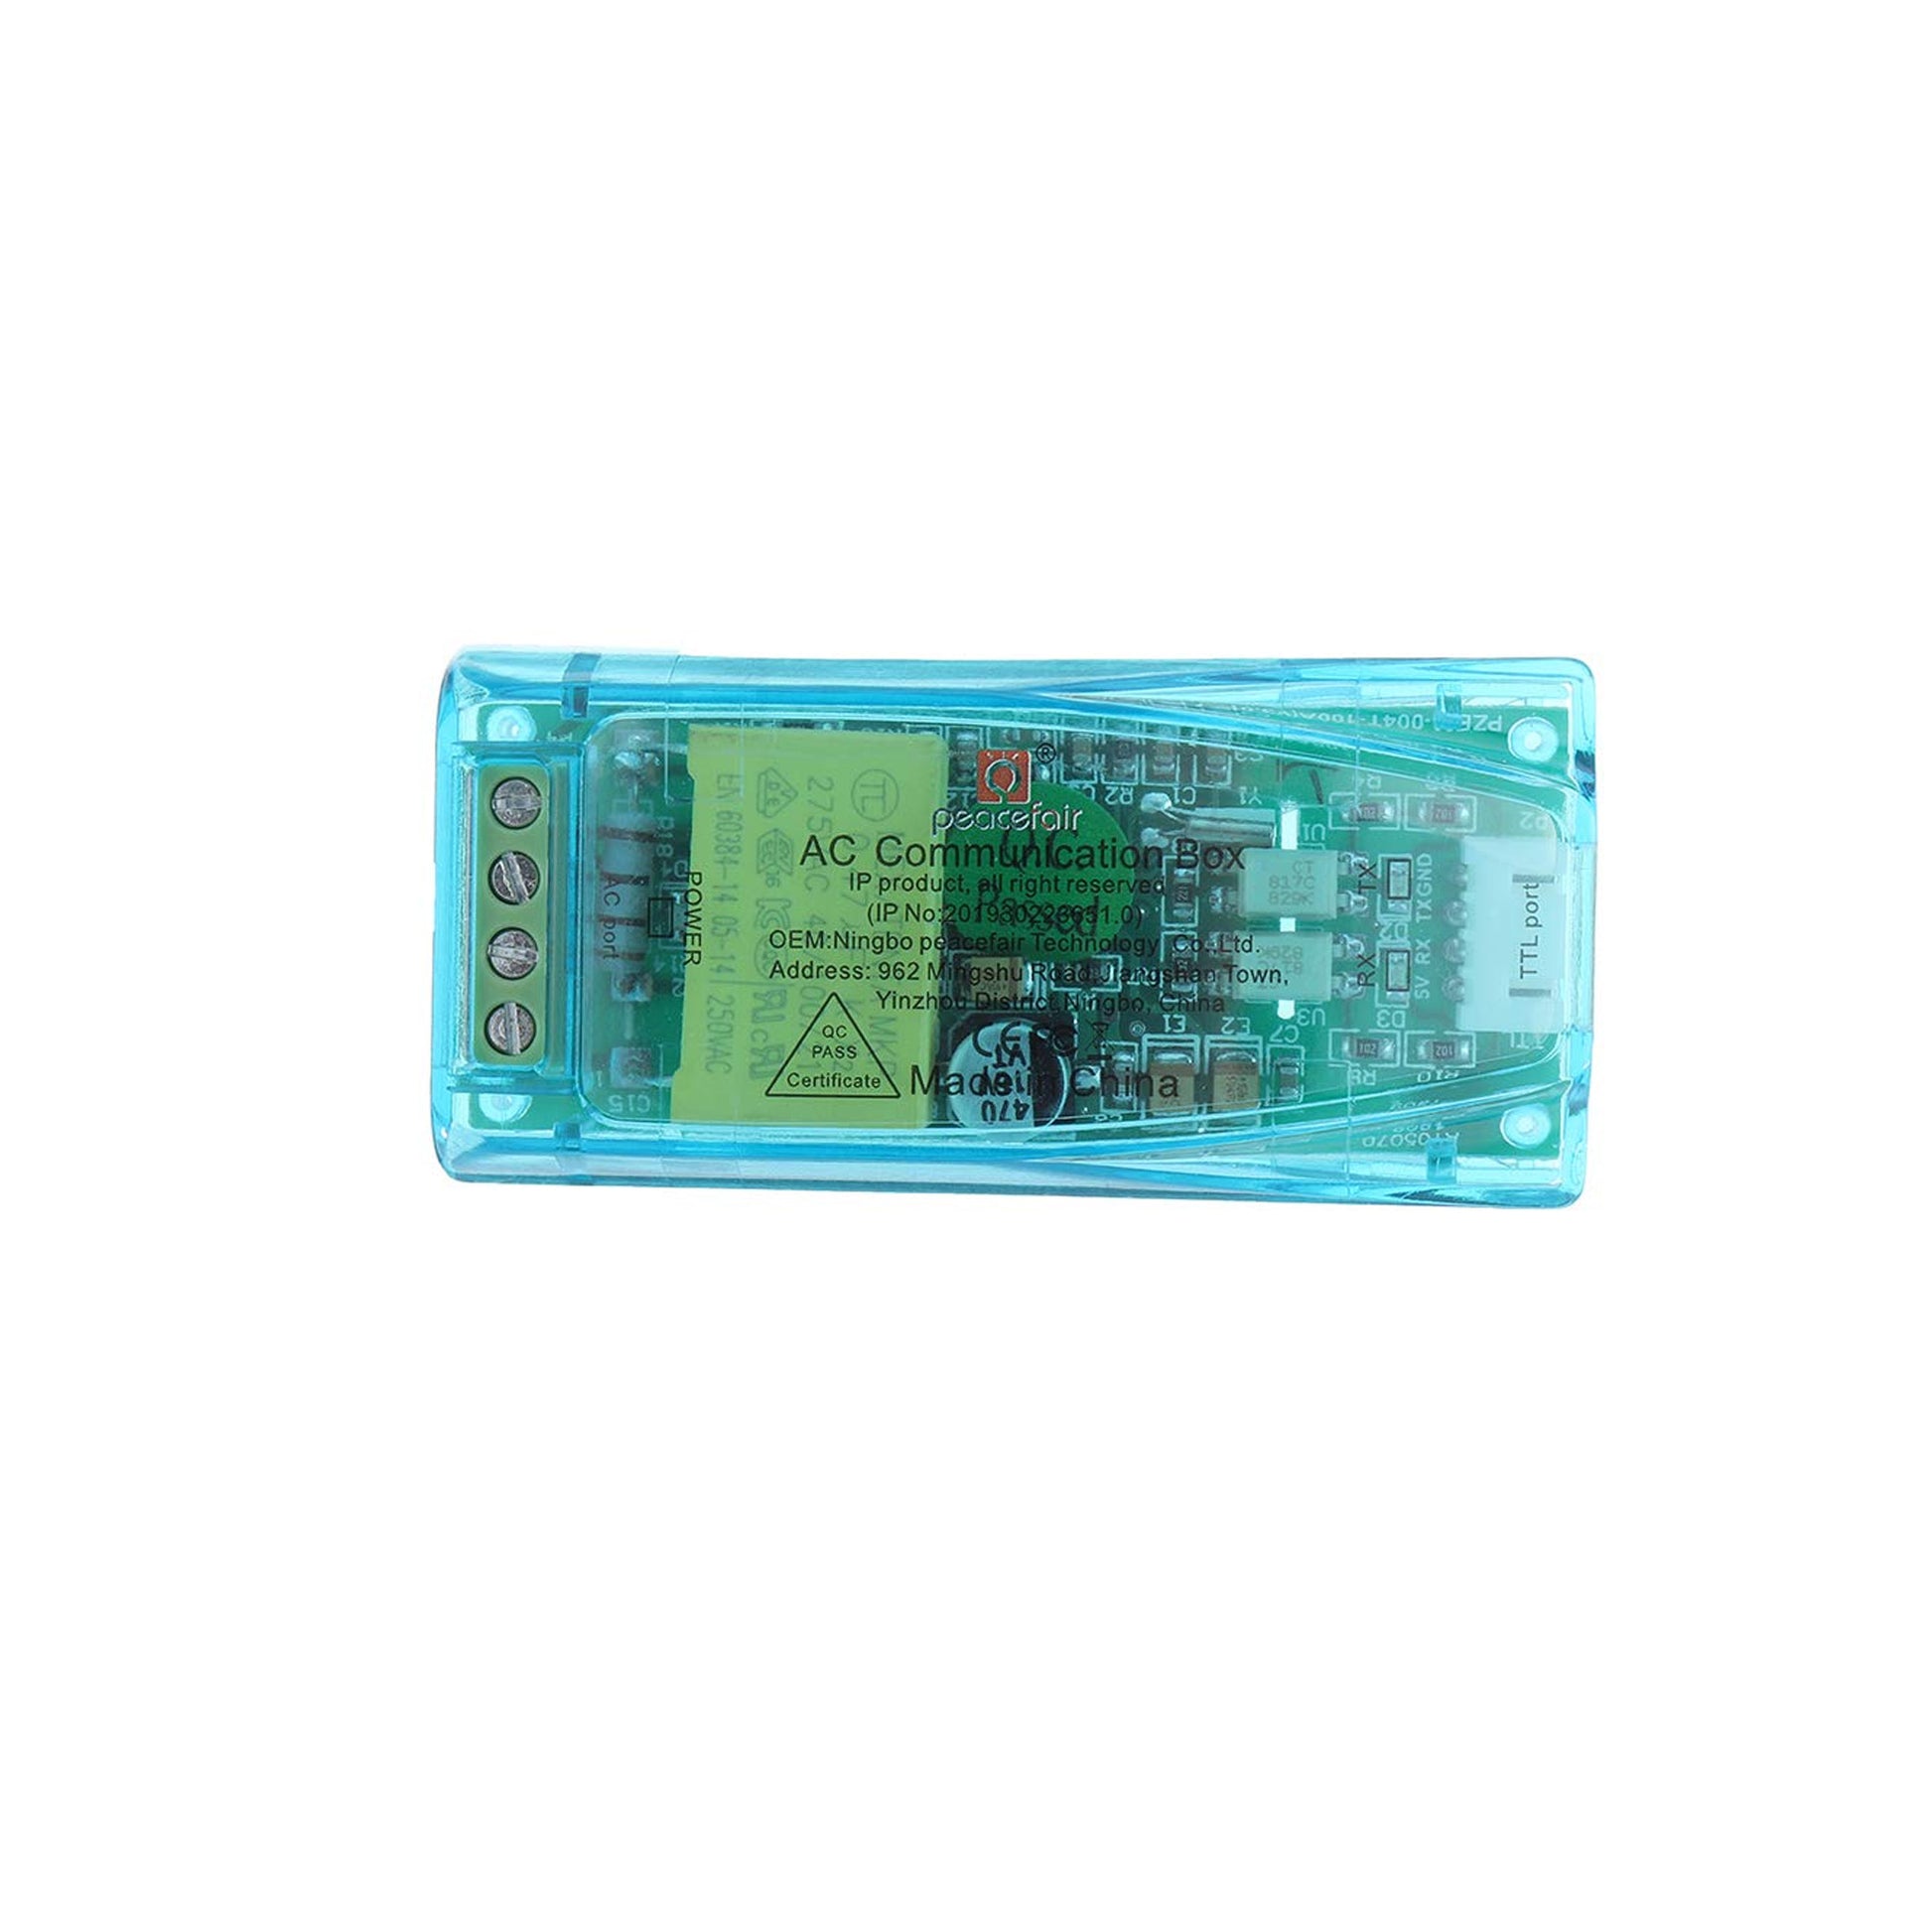 PZEM-004T 0-100A AC Communication Box TTL Serial Module Voltage Current Power Frequency Modbus-RTU With Case - 10A - RS2745 - REES52